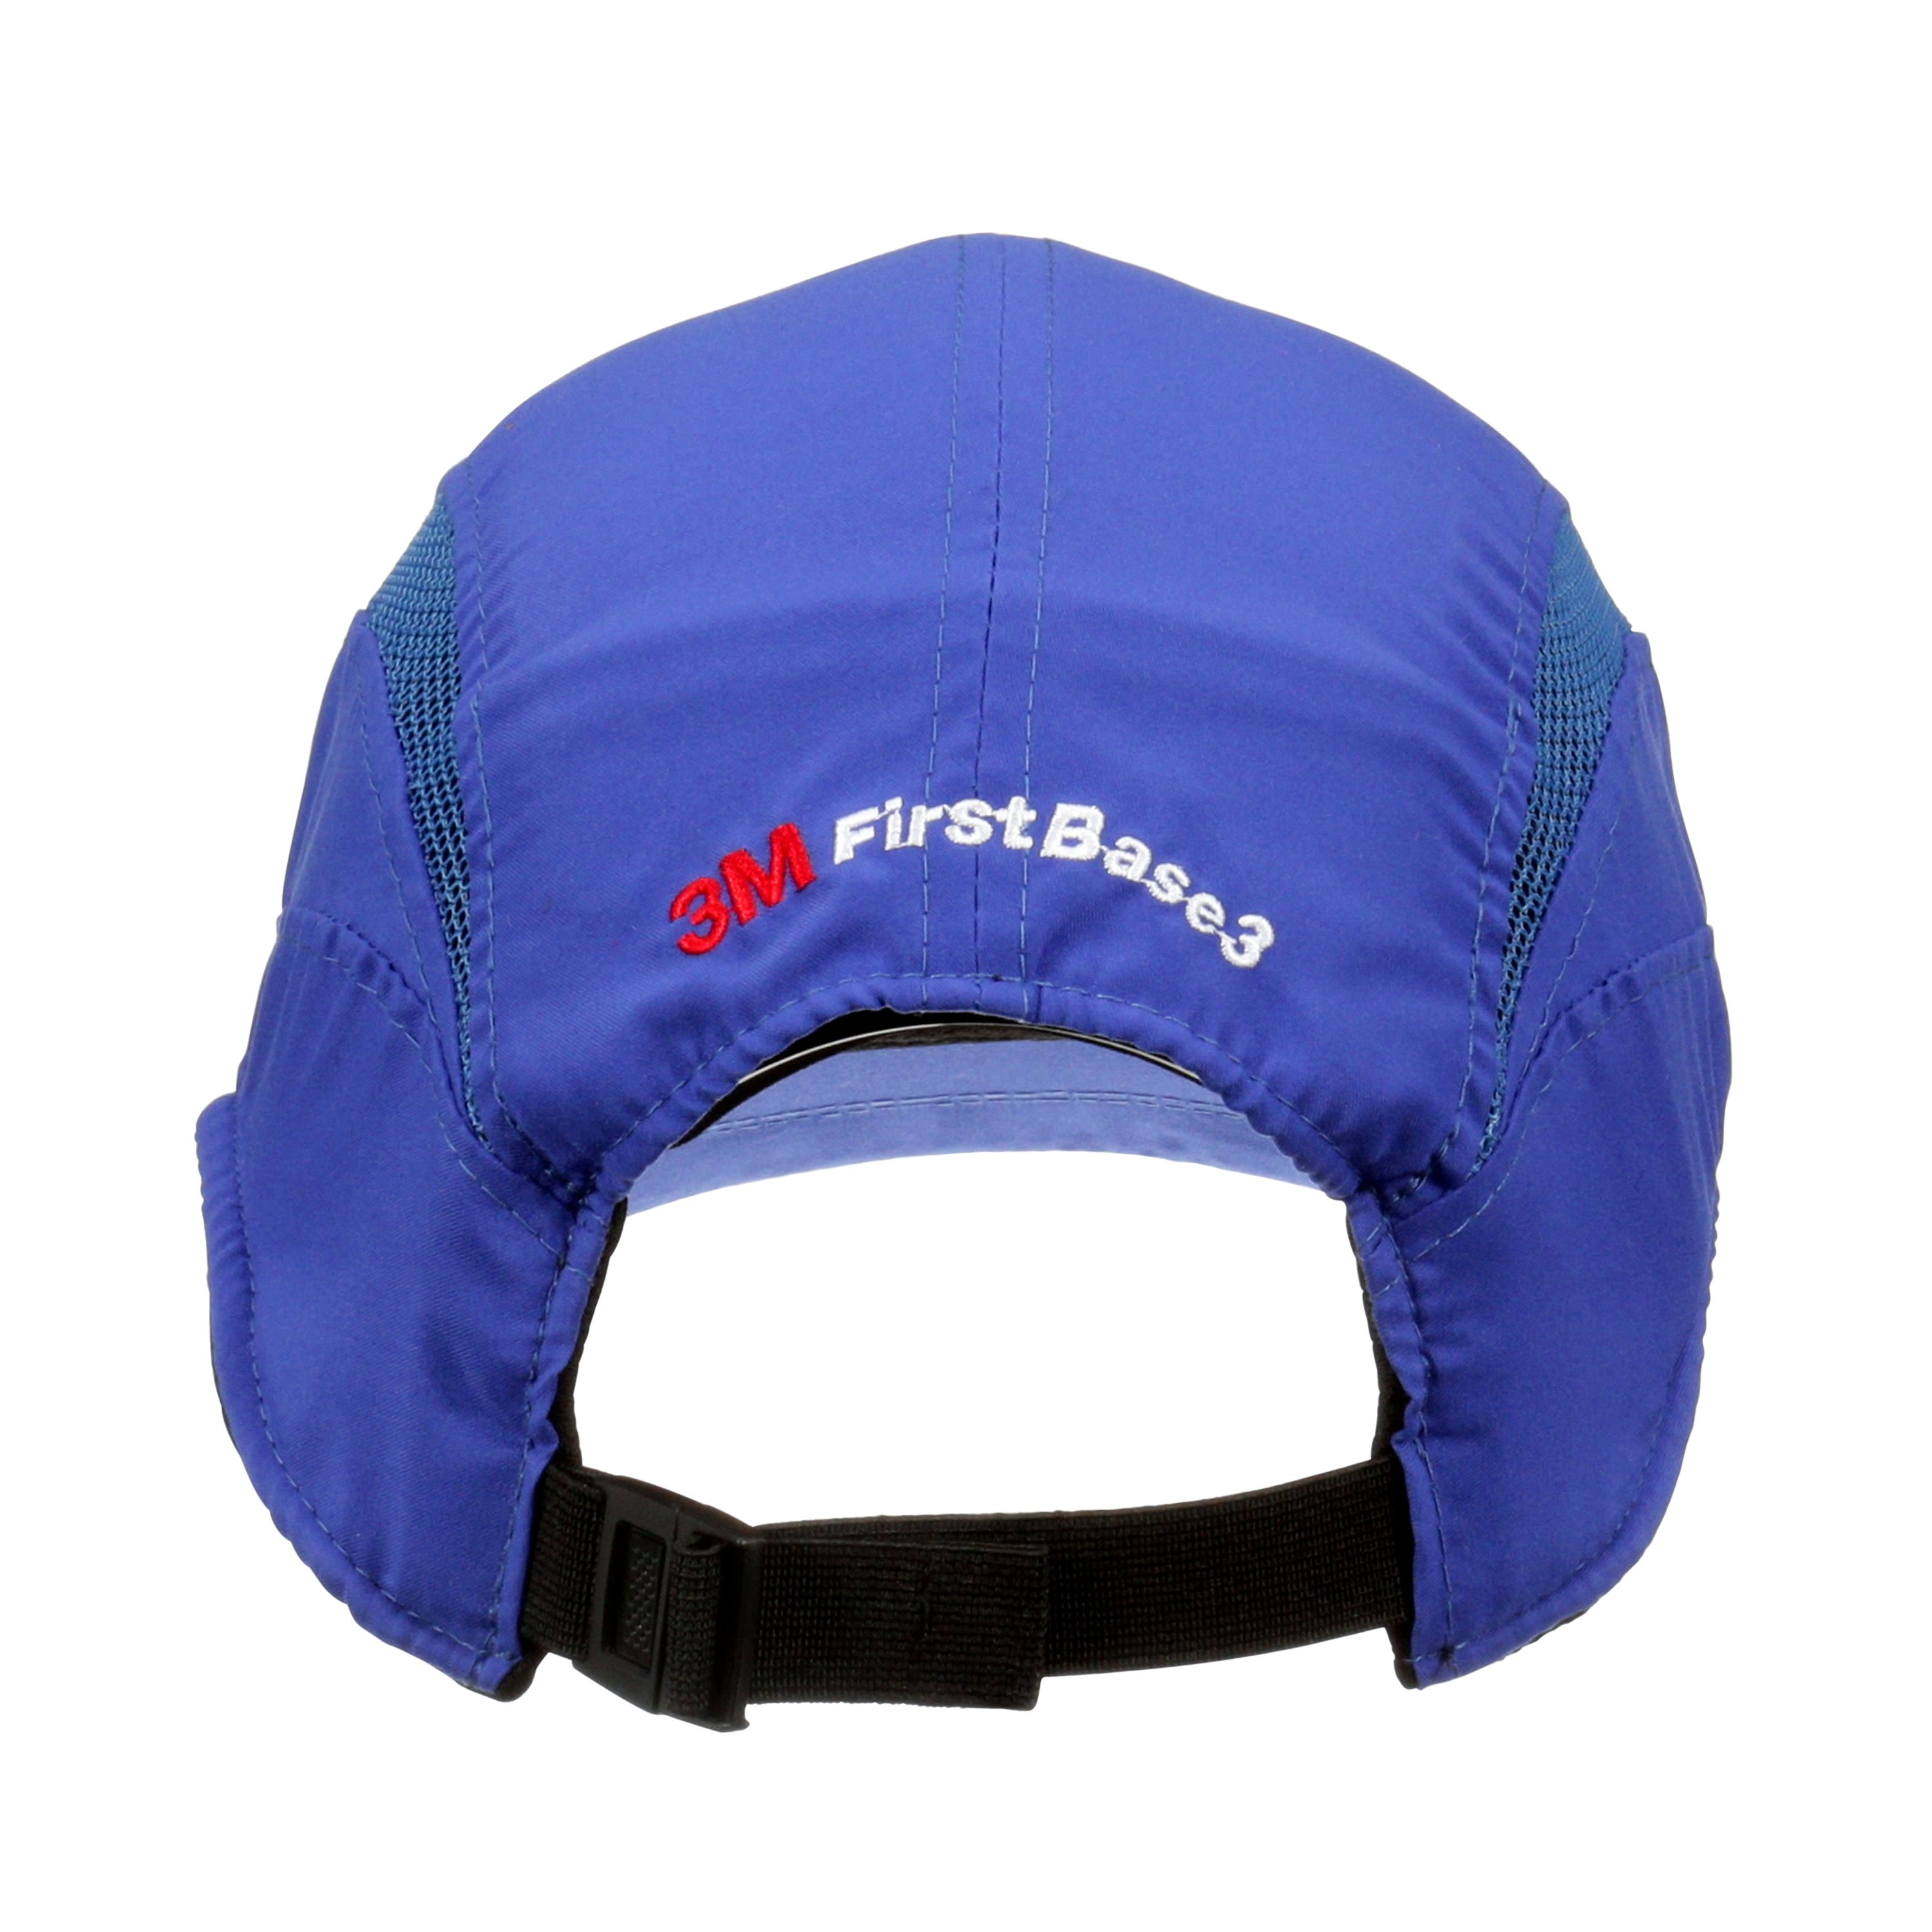 3M Blue Short Peaked Bump Cap, ABS Protective Material